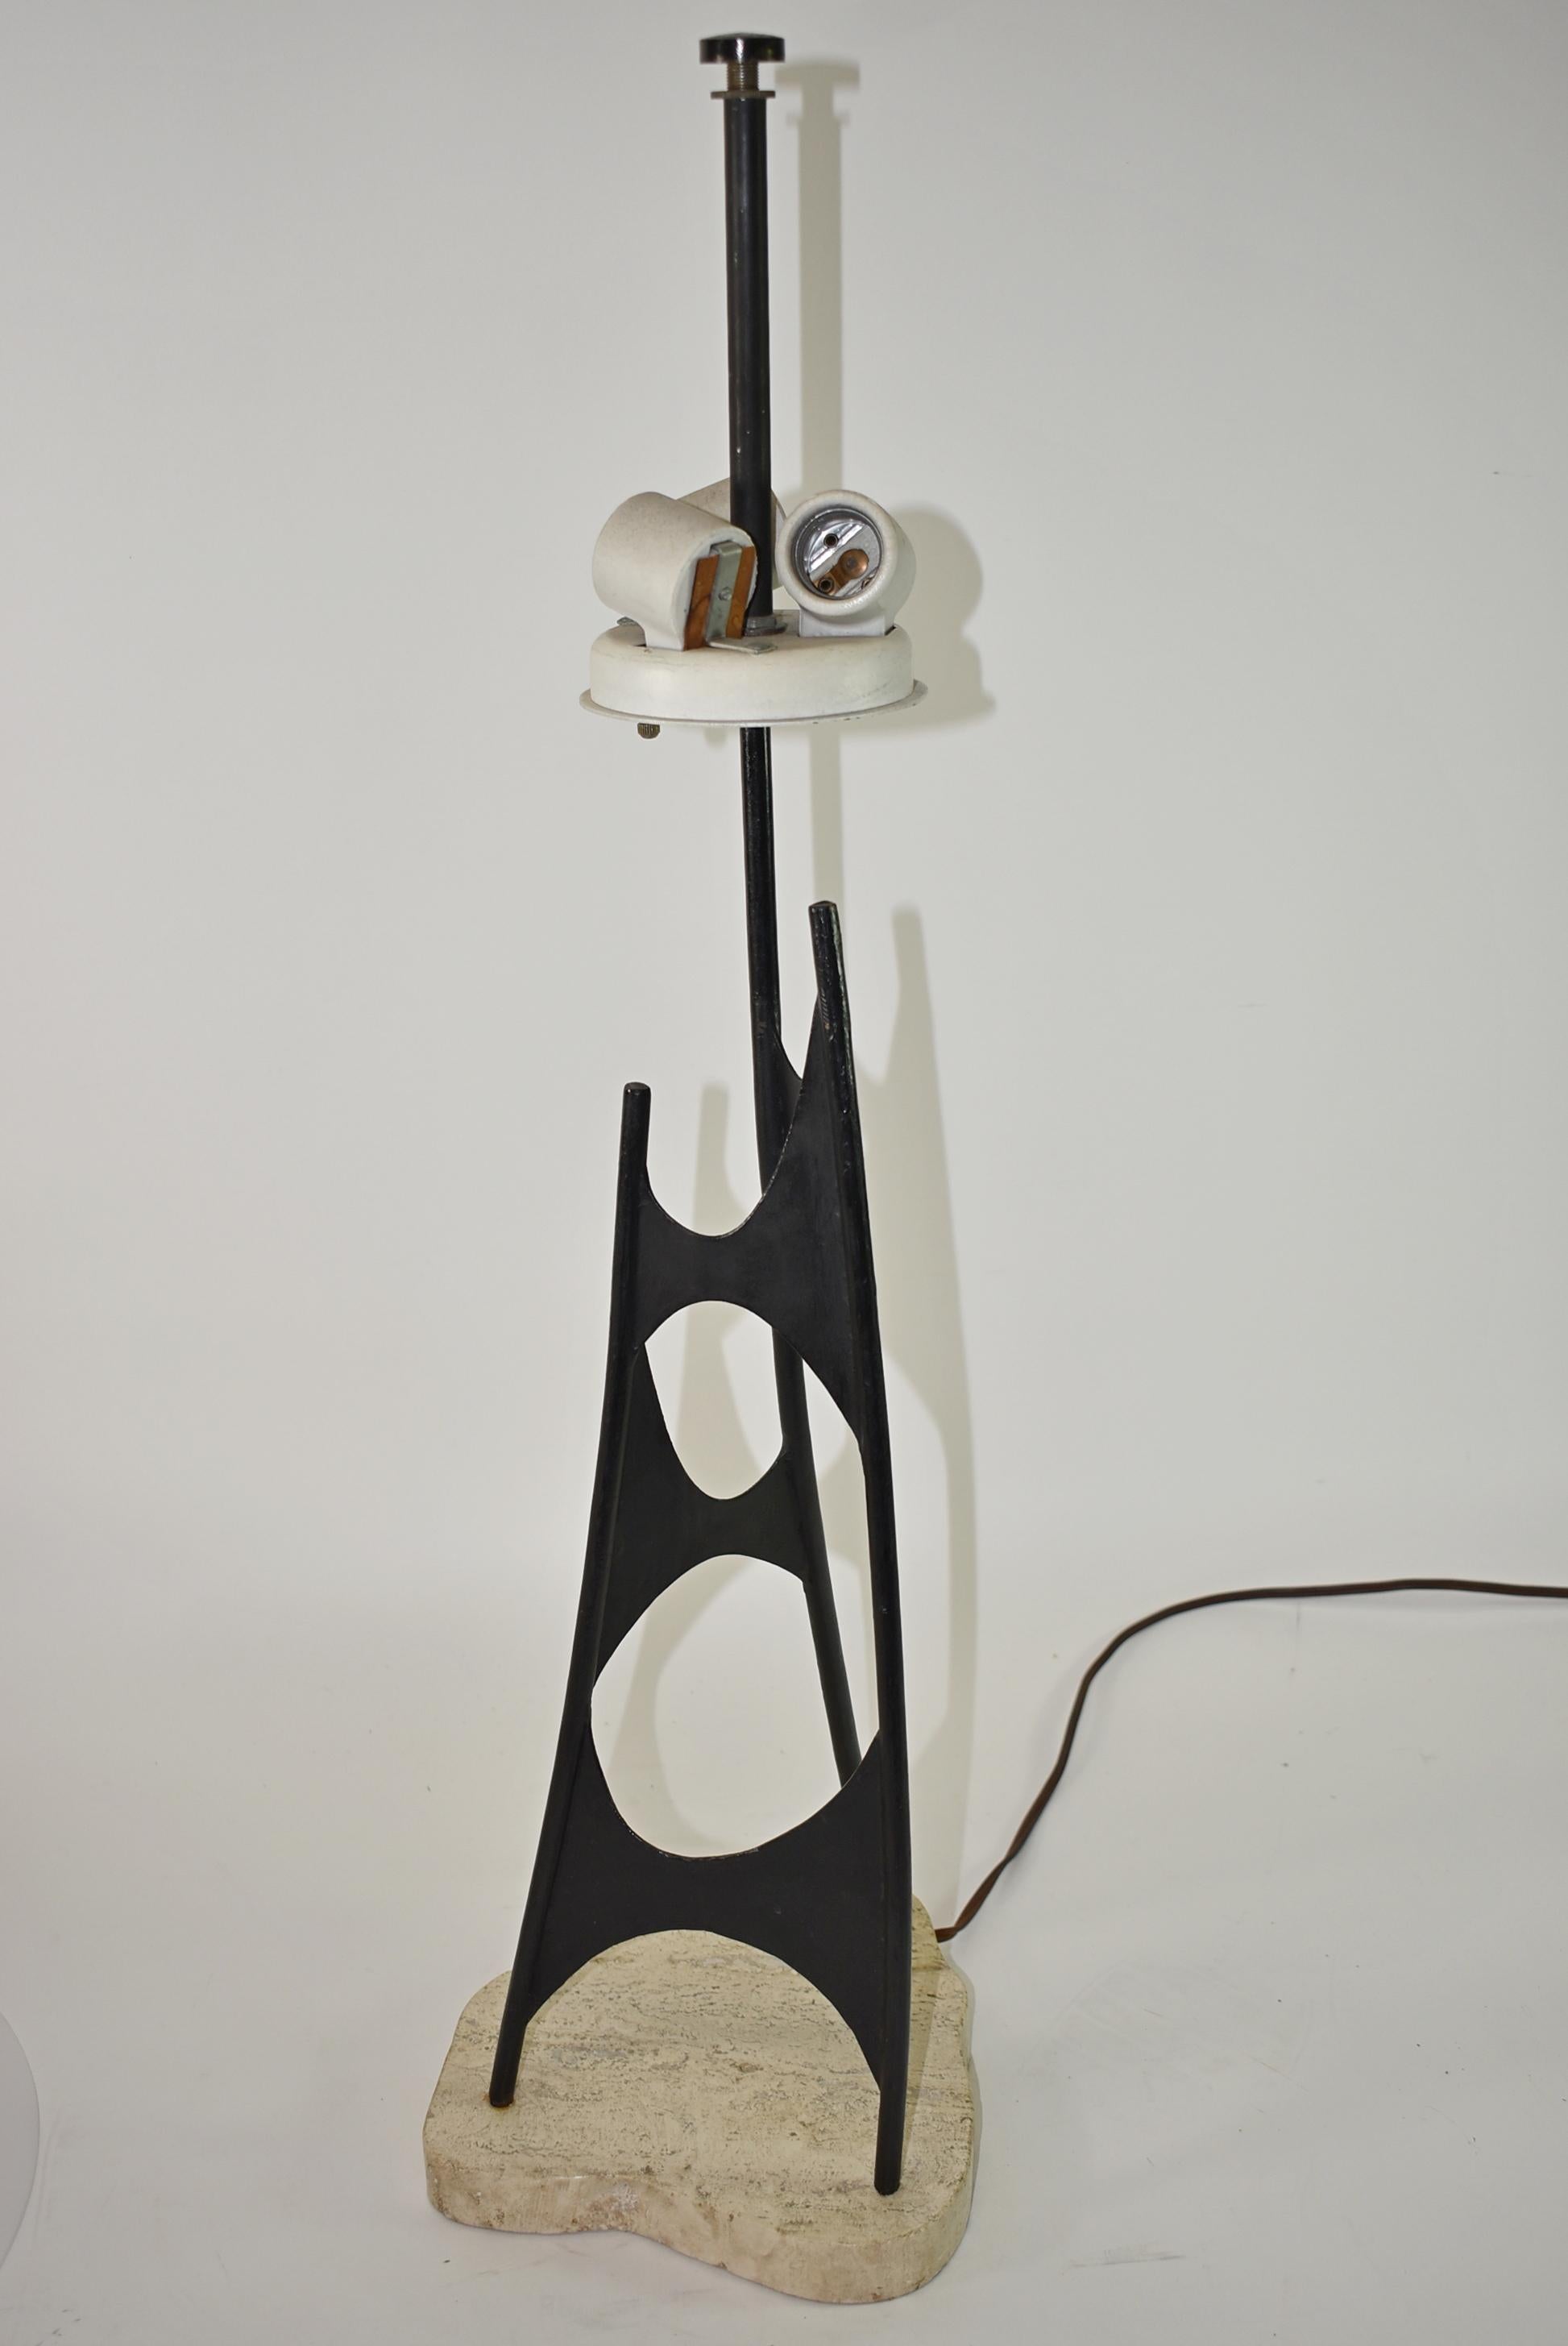 Maurizio Tempestini sculptural steel modern table lamp. Three socket light cluster. Painted black on a travertine base. New shade and diffuser.